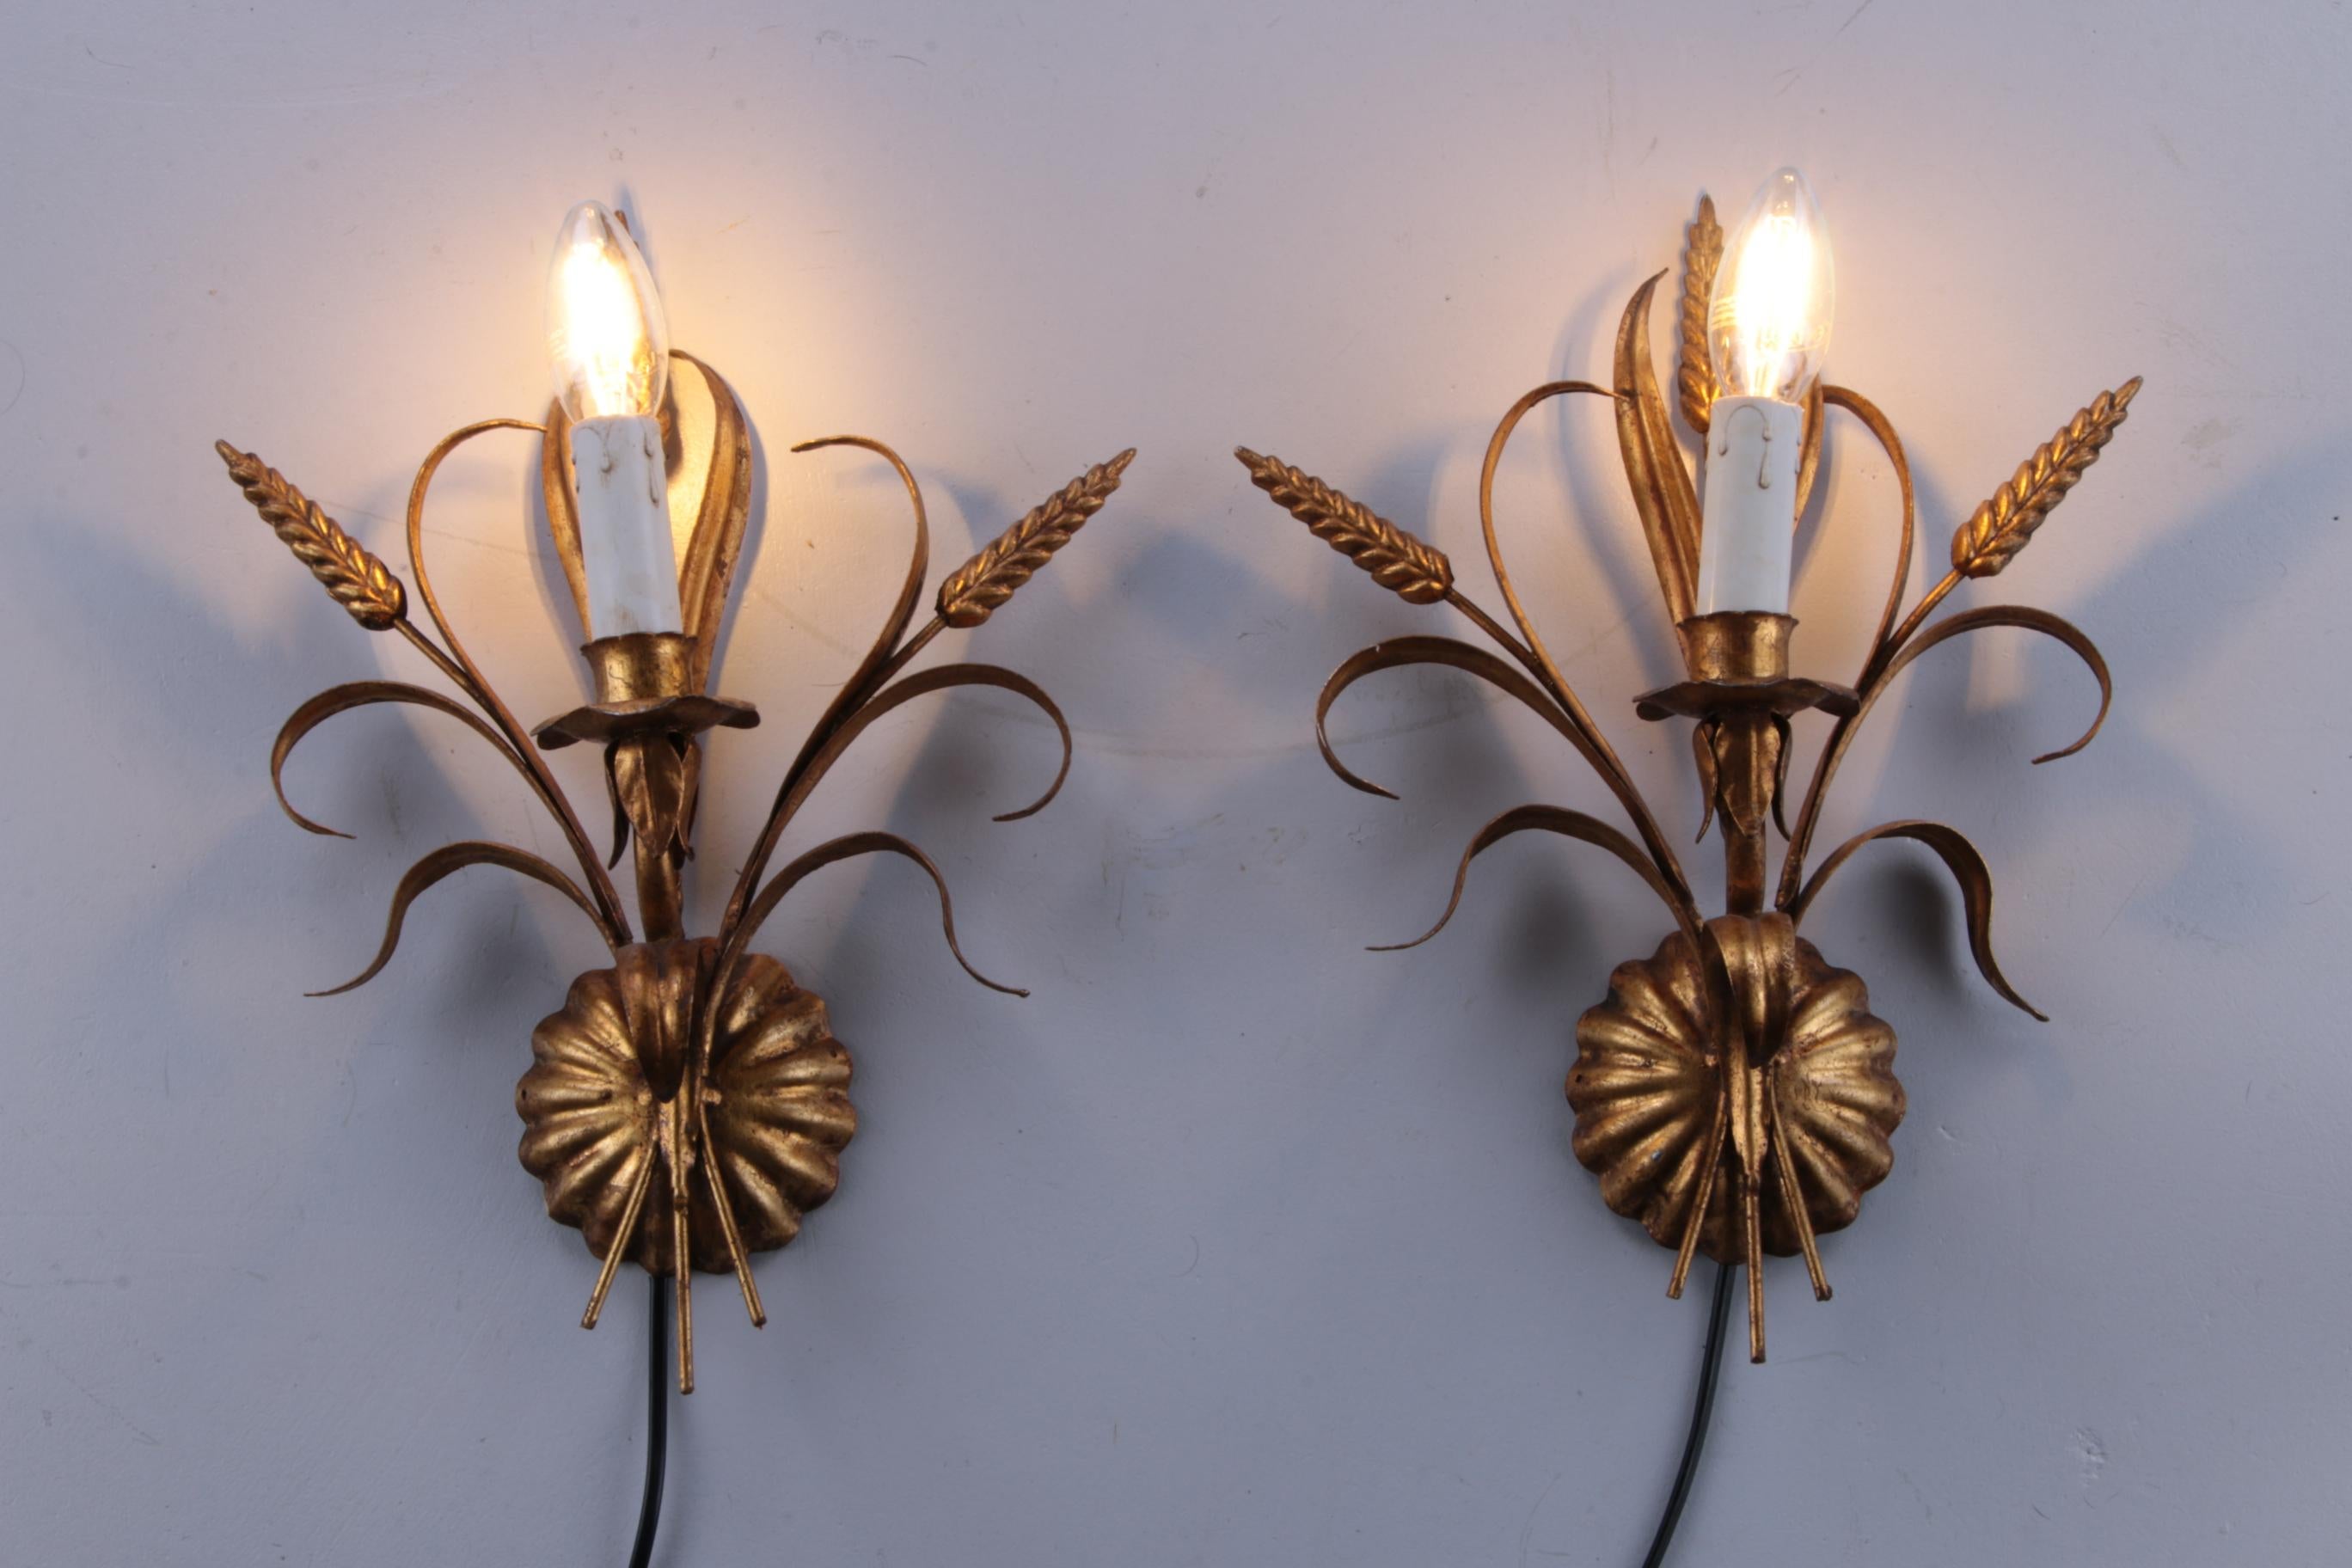 Pair of Vintage Wall Lamps in Regency Style by Hans Kogl, 1970 For Sale 7